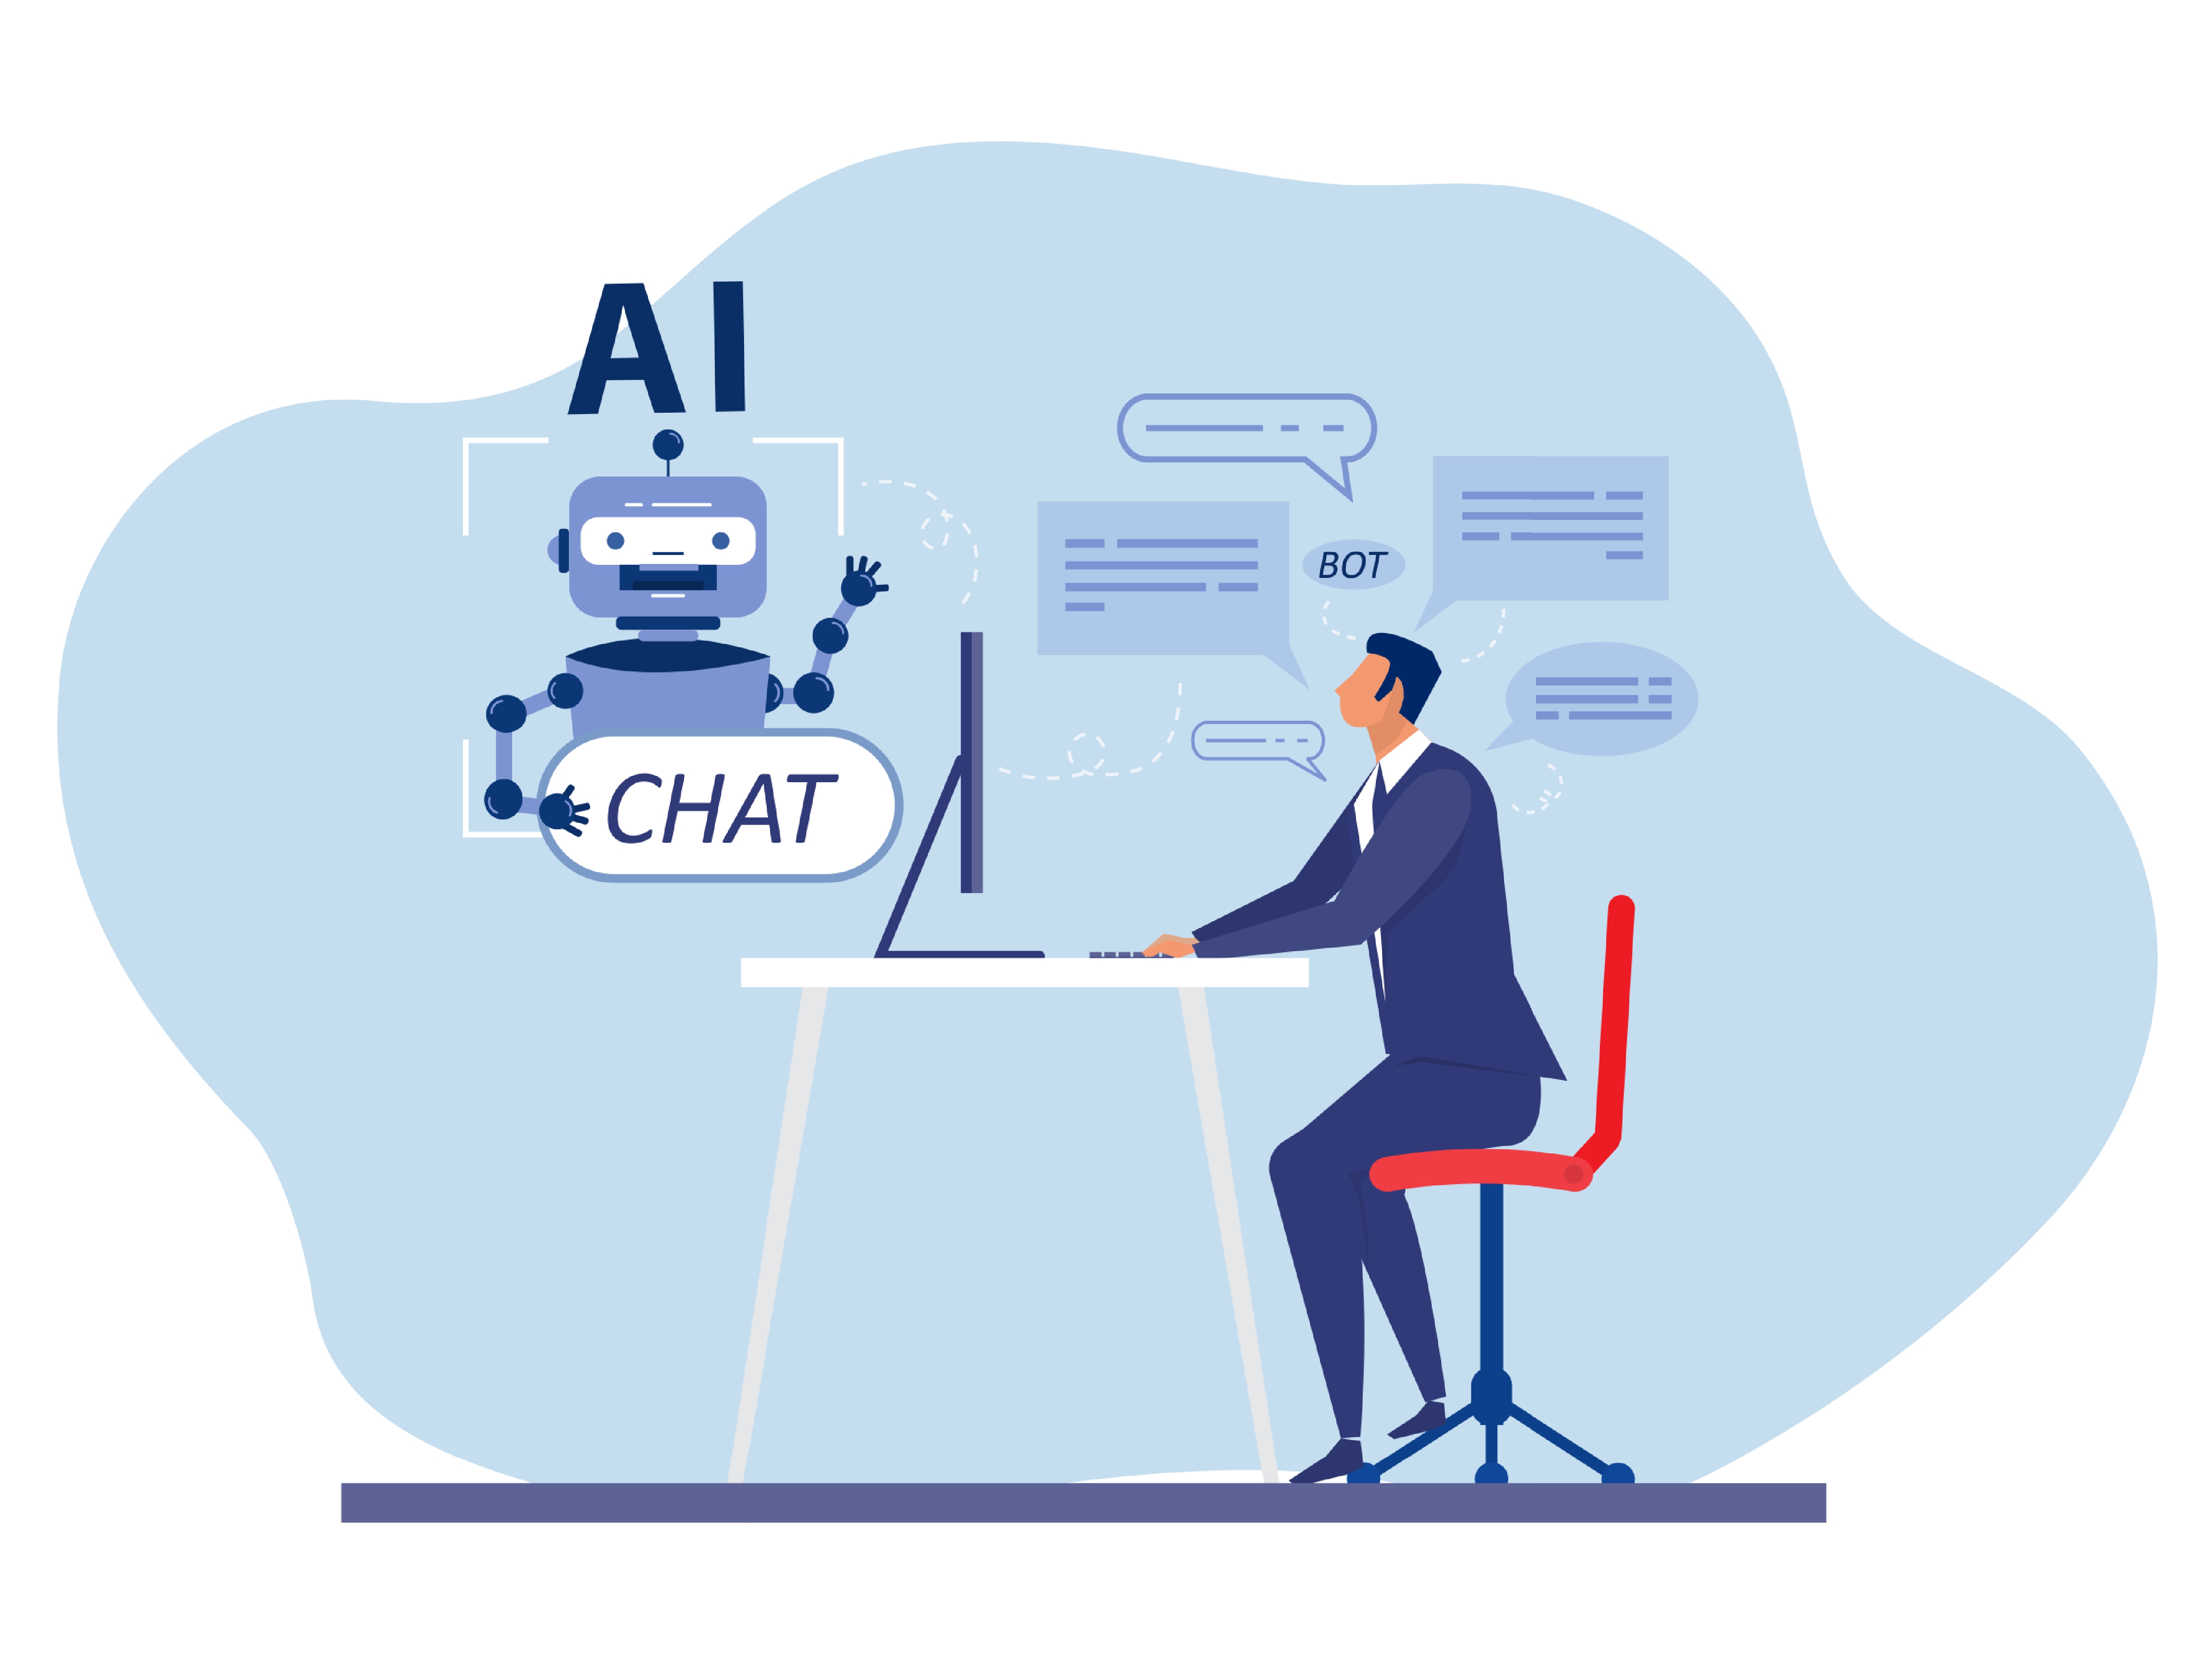 An illustration of a person chatting with an AI chatbot on their computer.